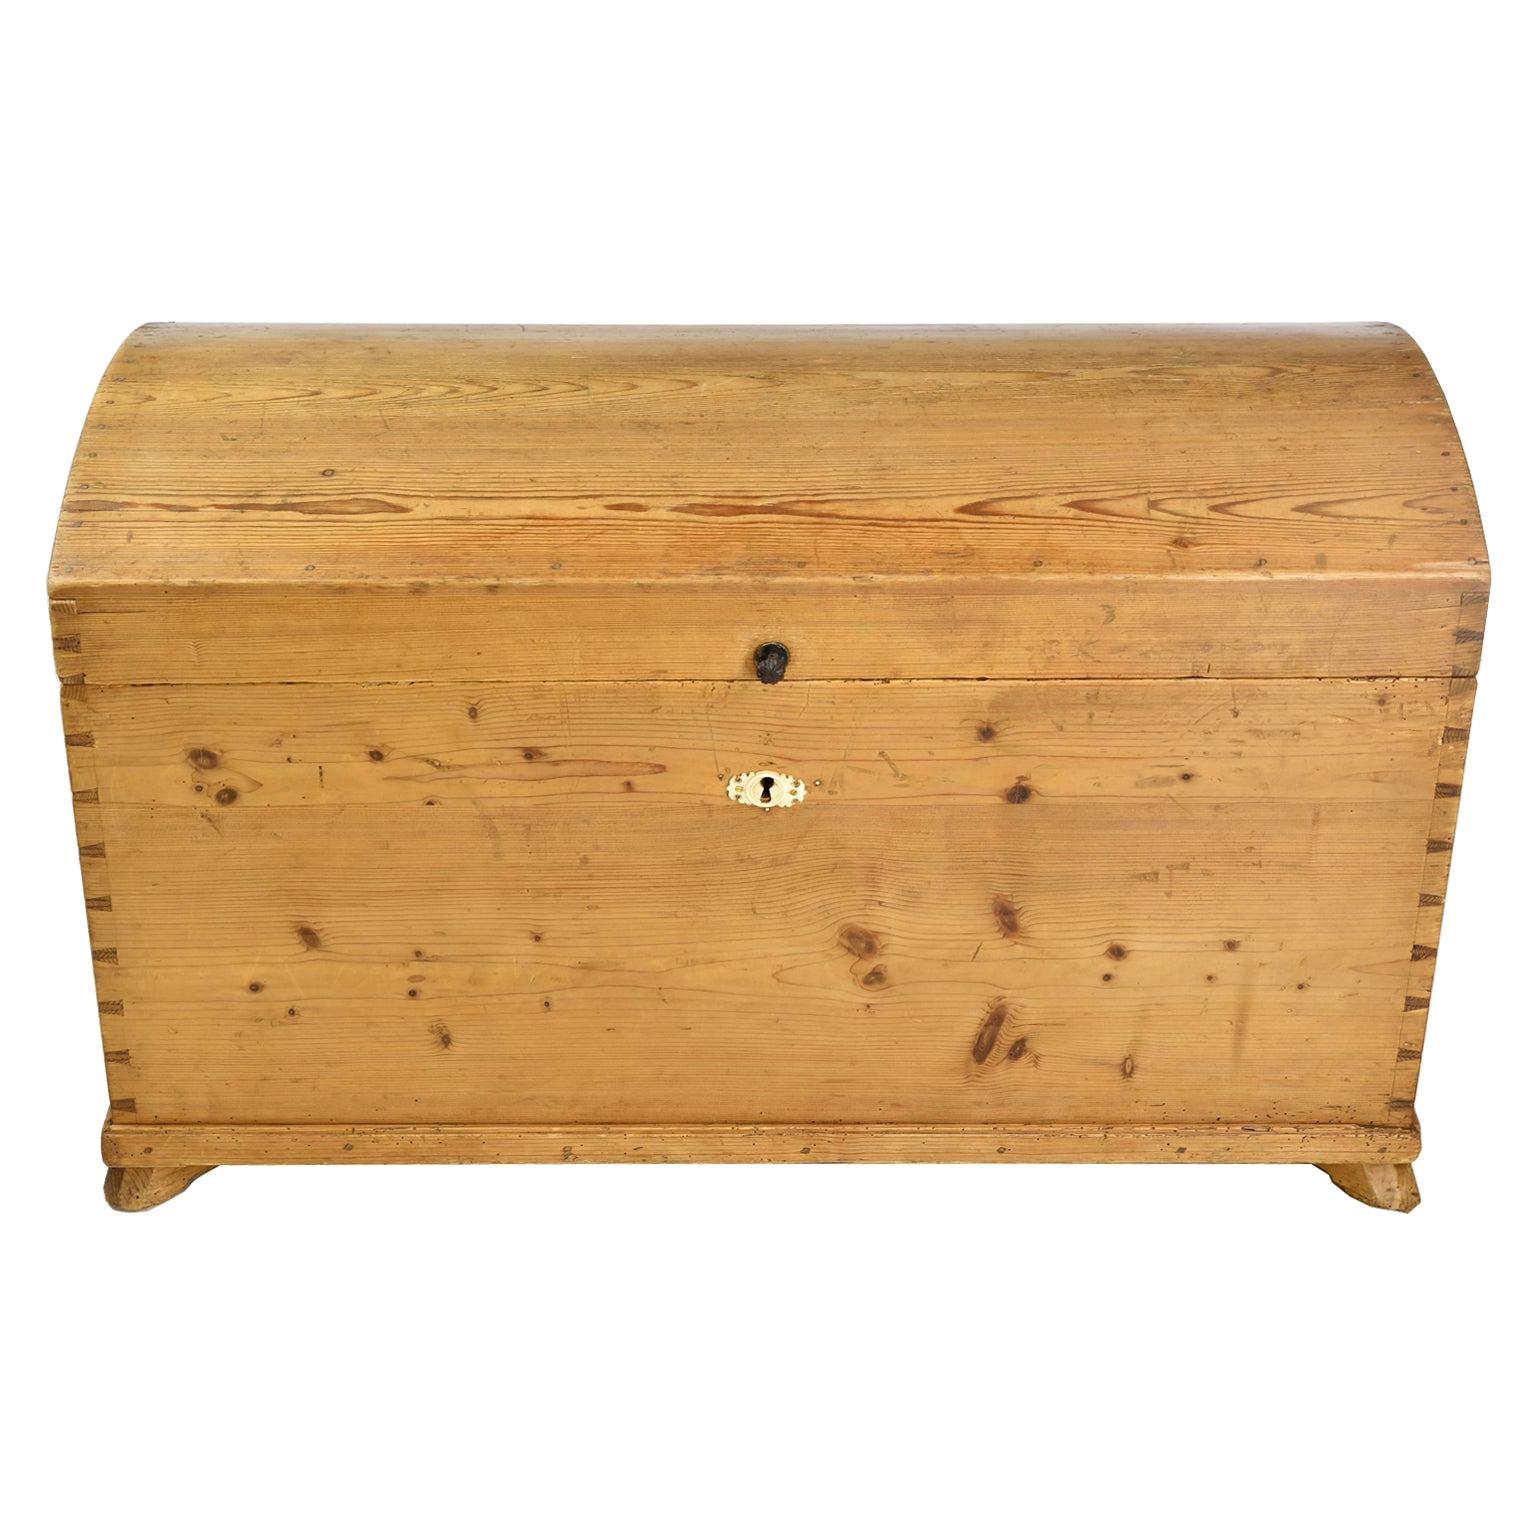 Antique European Dome-Top Blanket Chest in Pine with Interior Glove Box